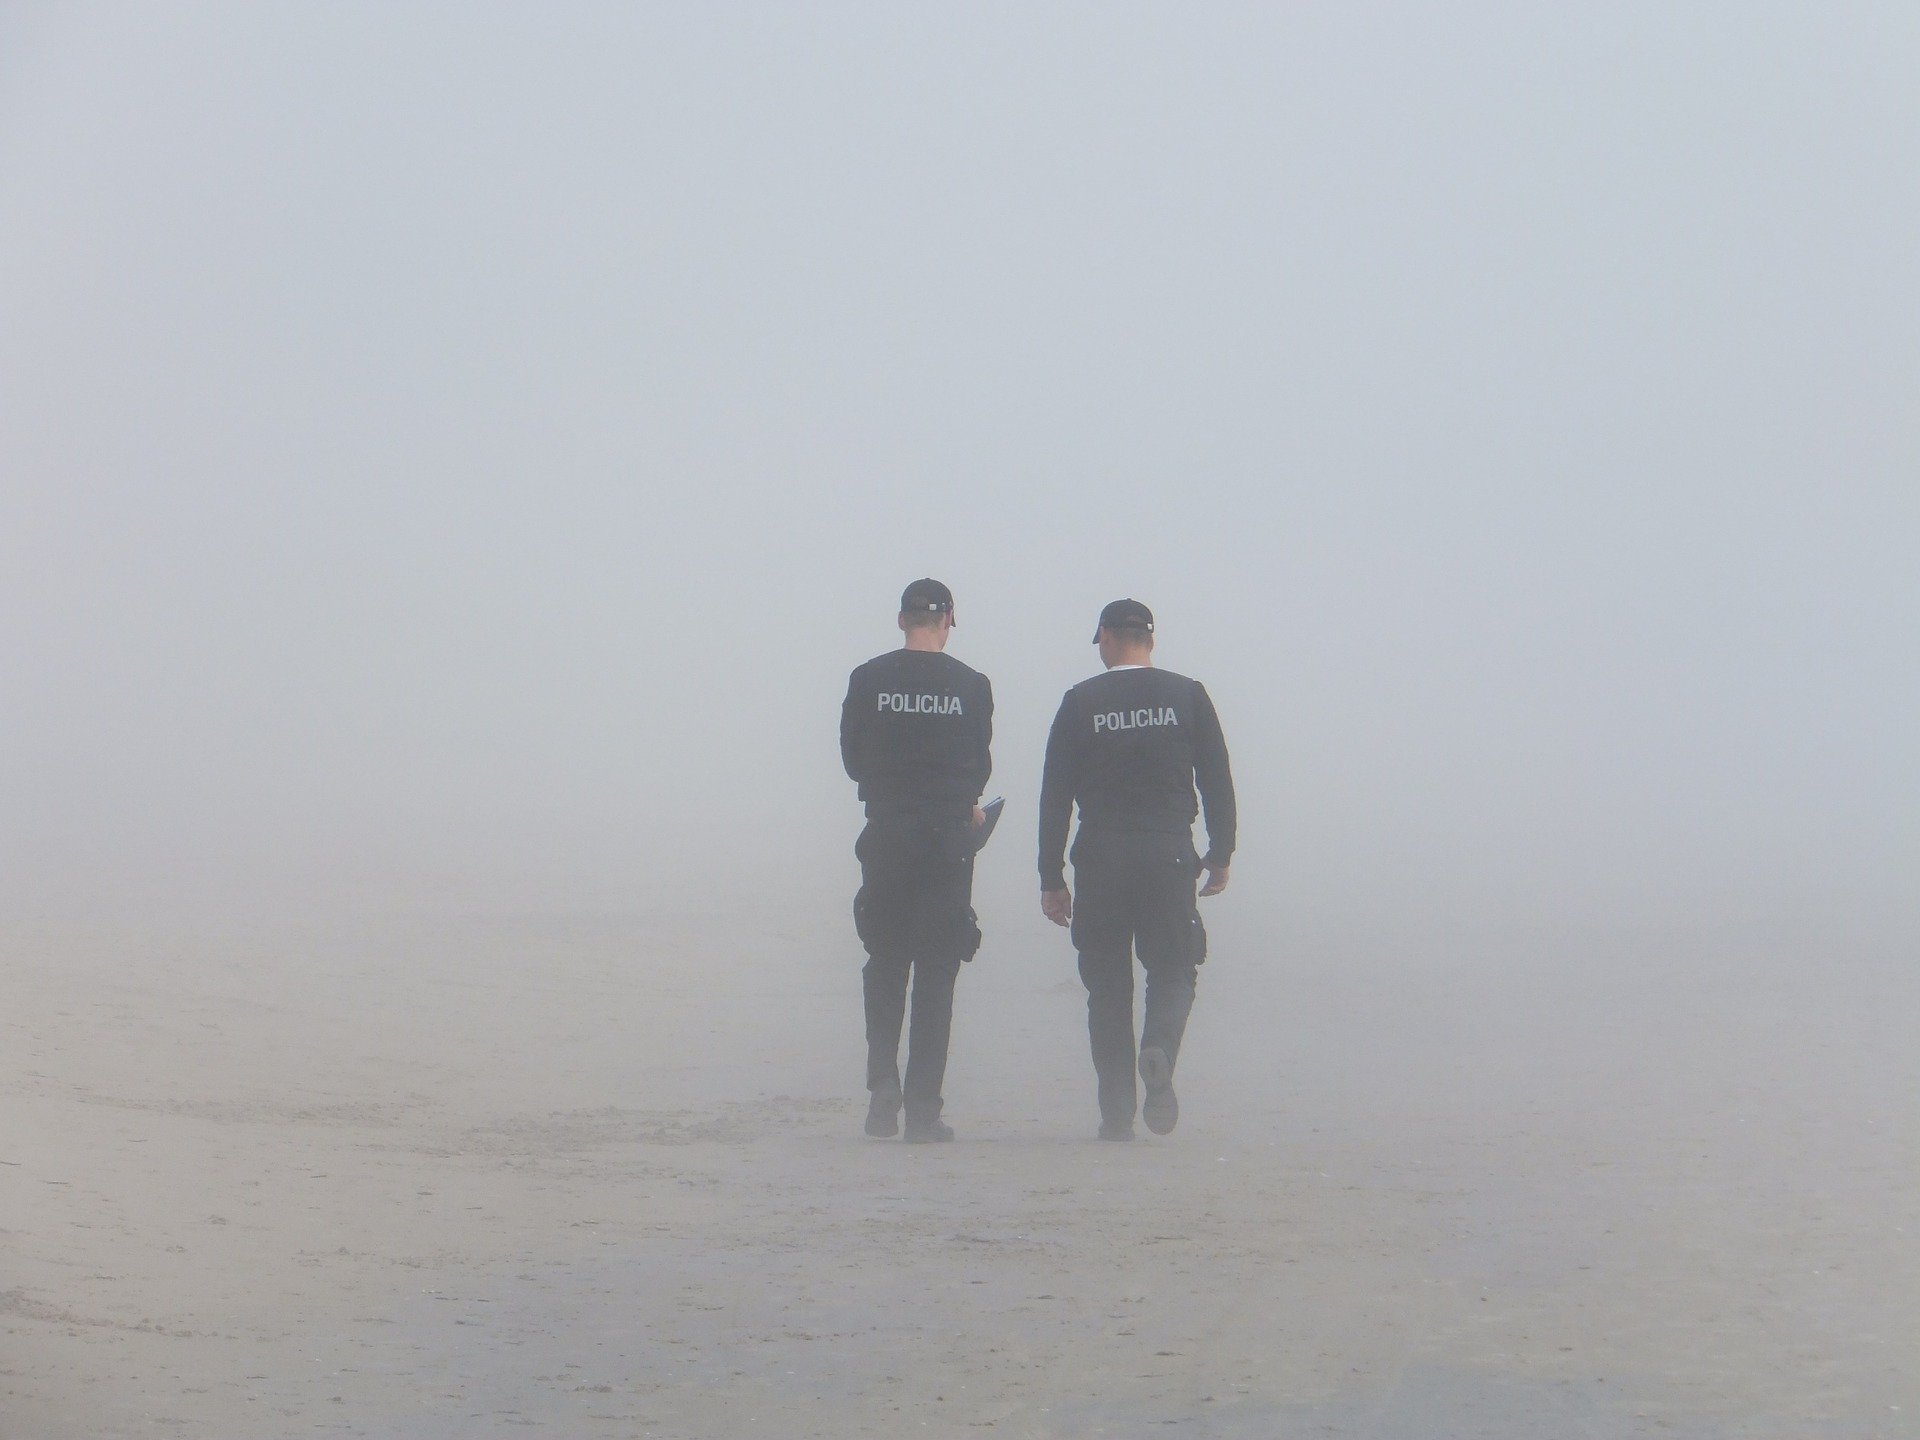 Two police officers at the seaside | Source: Pixabay